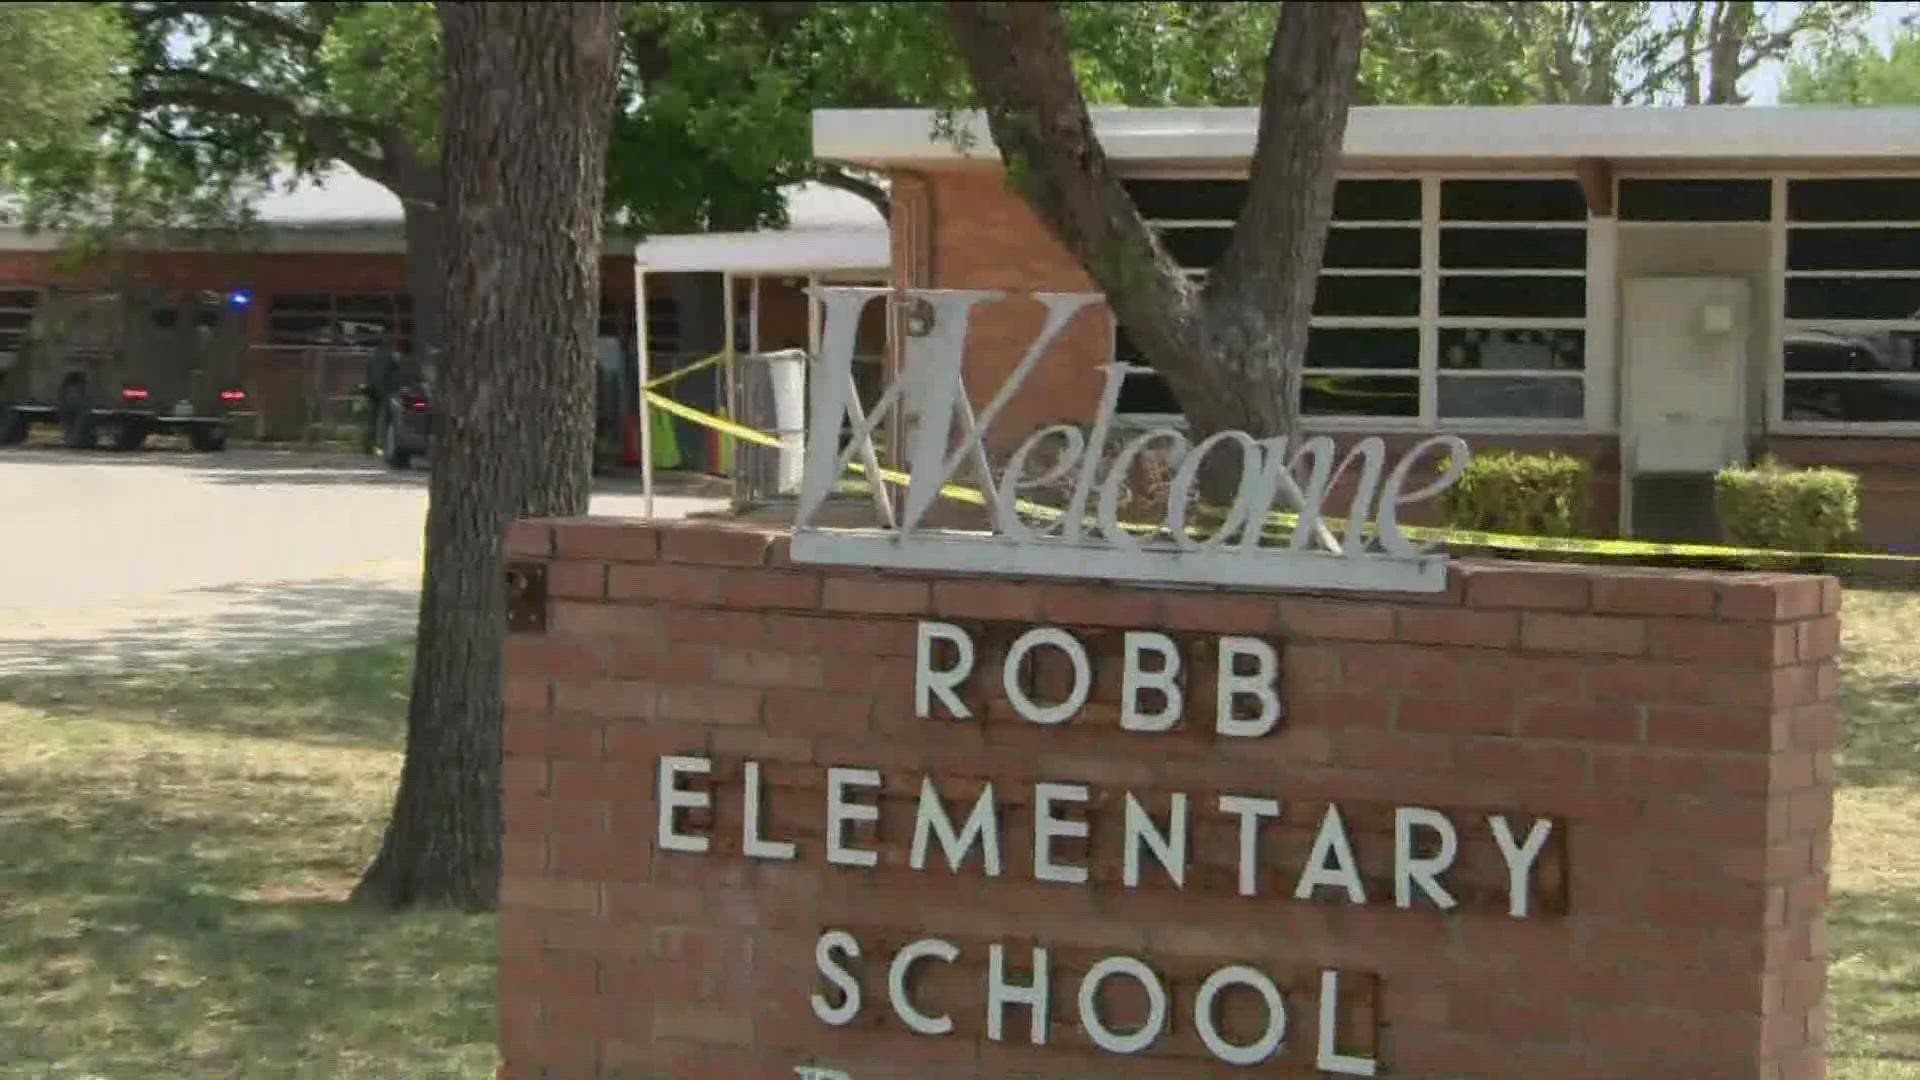 The death toll in the Robb Elementary School shooting has risen to 19 kids and two adults. The shooter, an 18-year-old man, is dead.